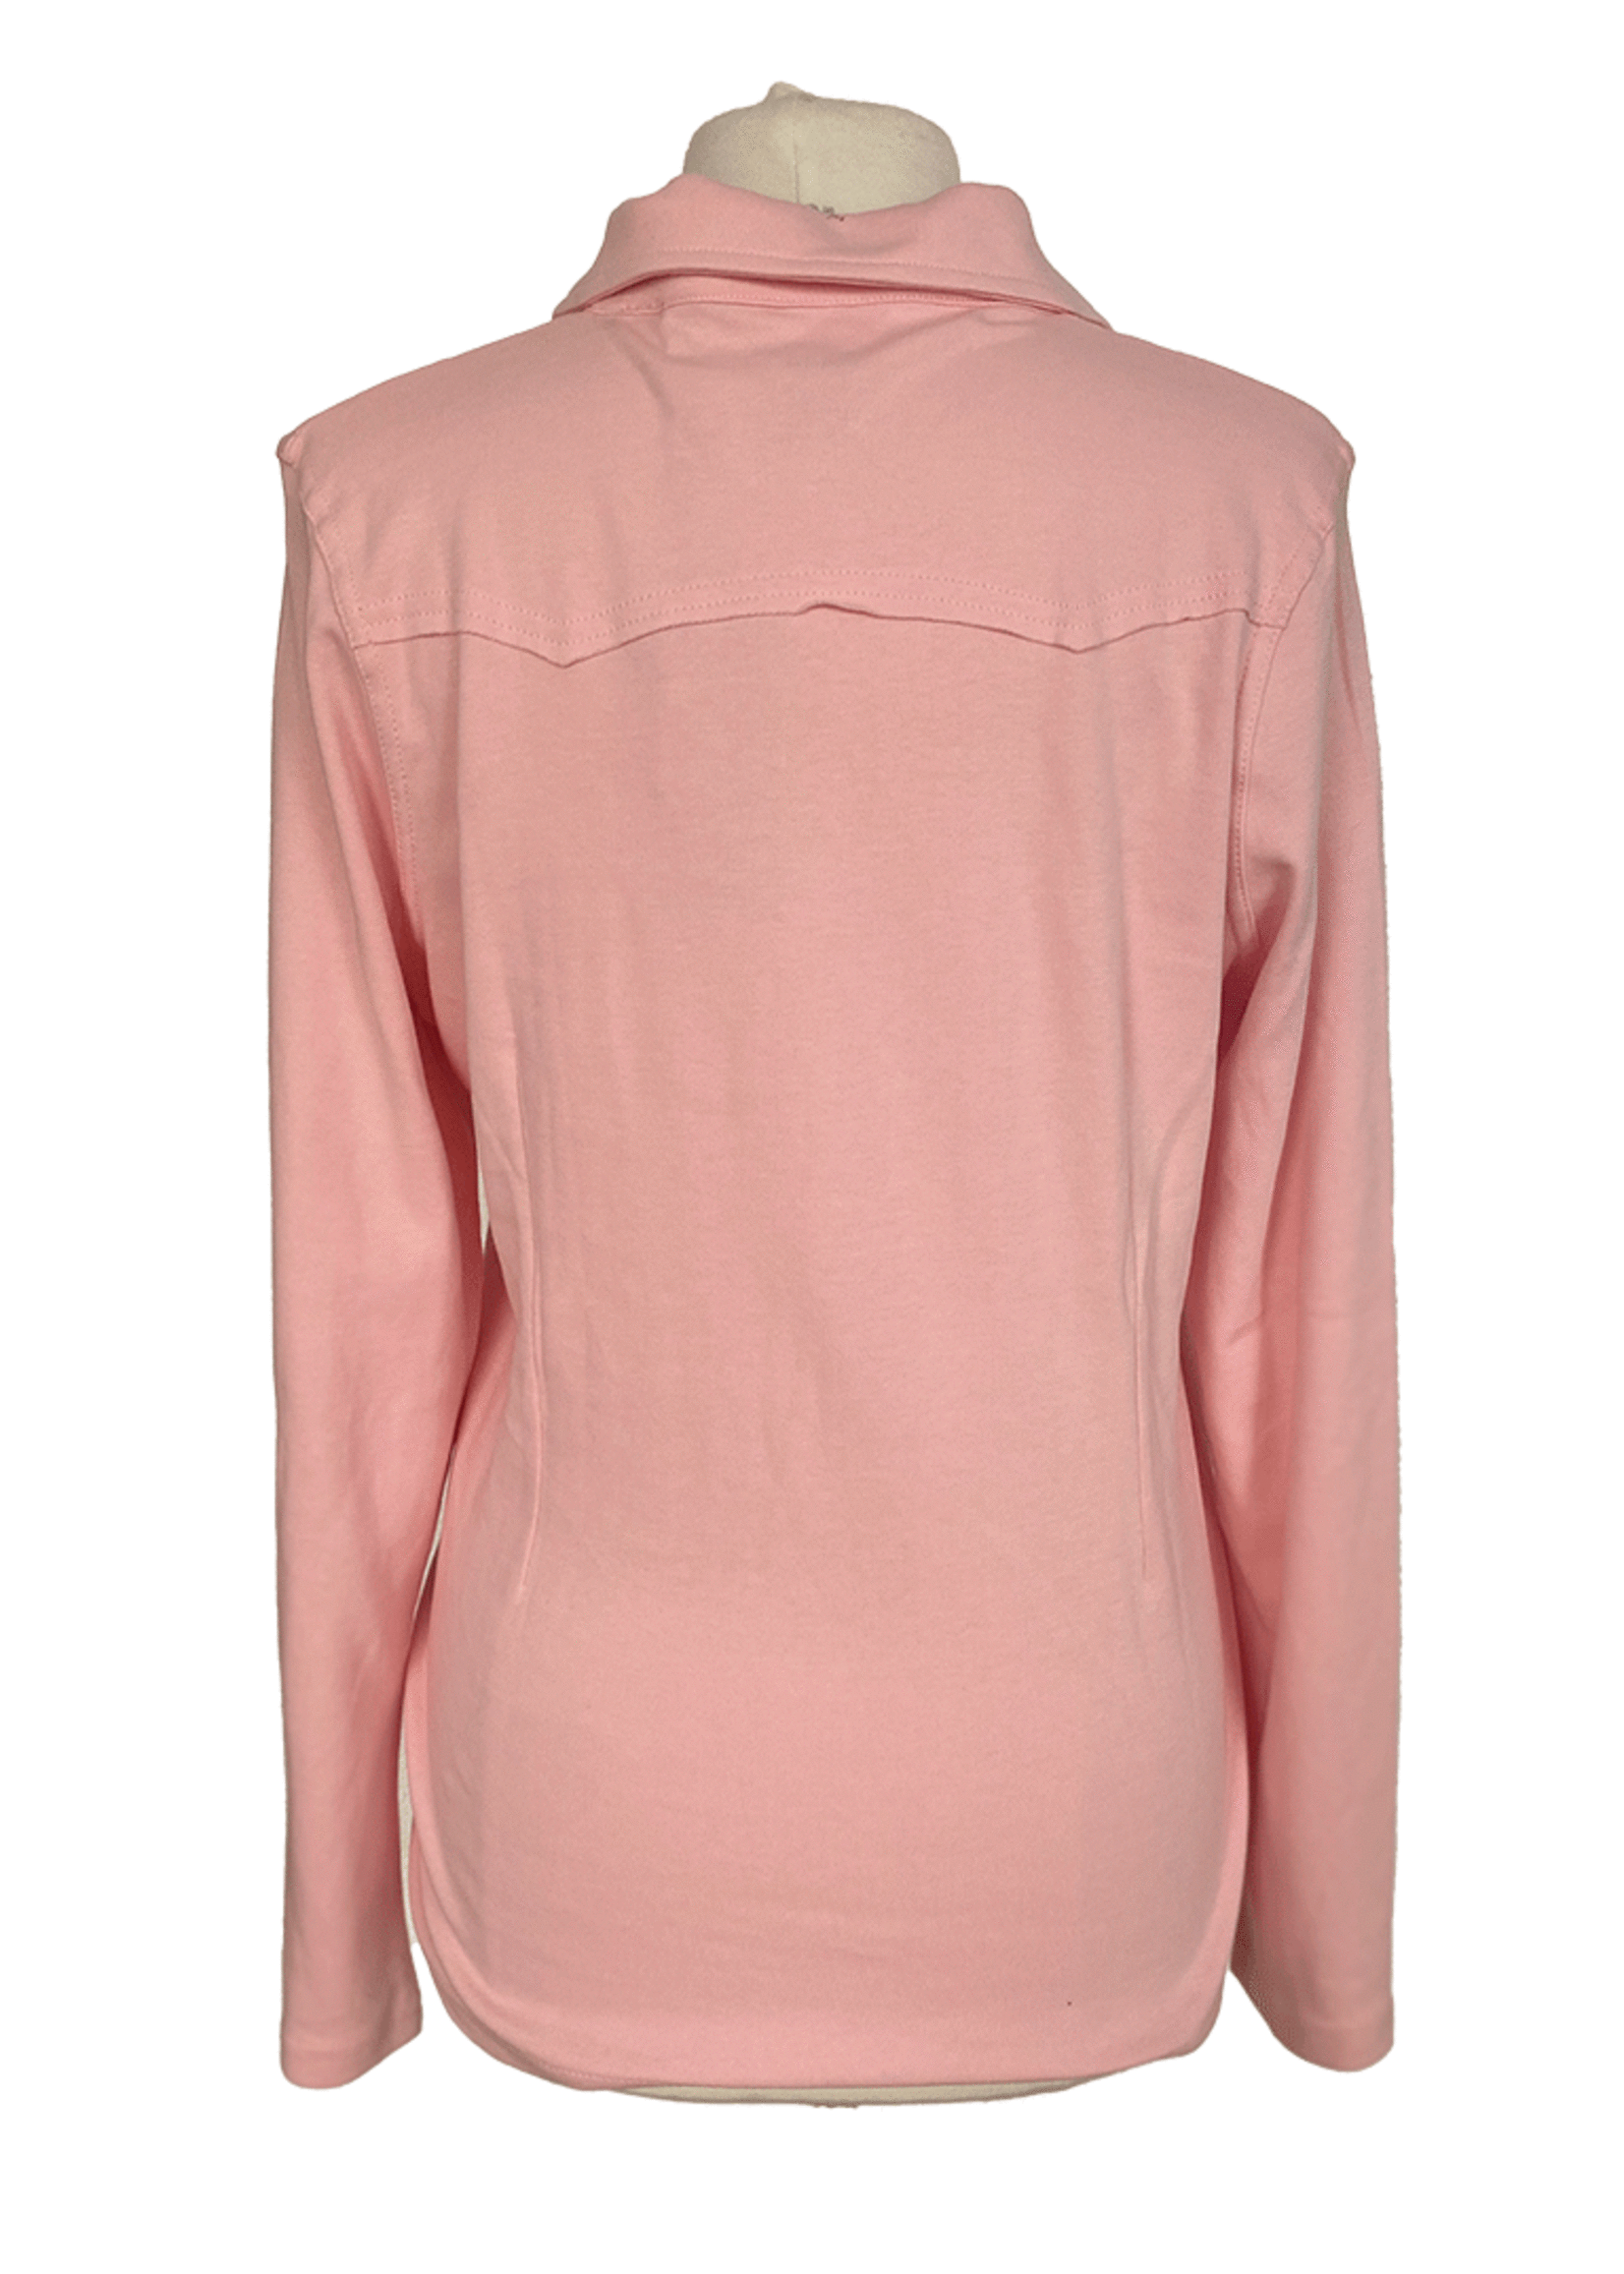 ESPRIT Interlock Blouse Long sleeves with Pockets Rose